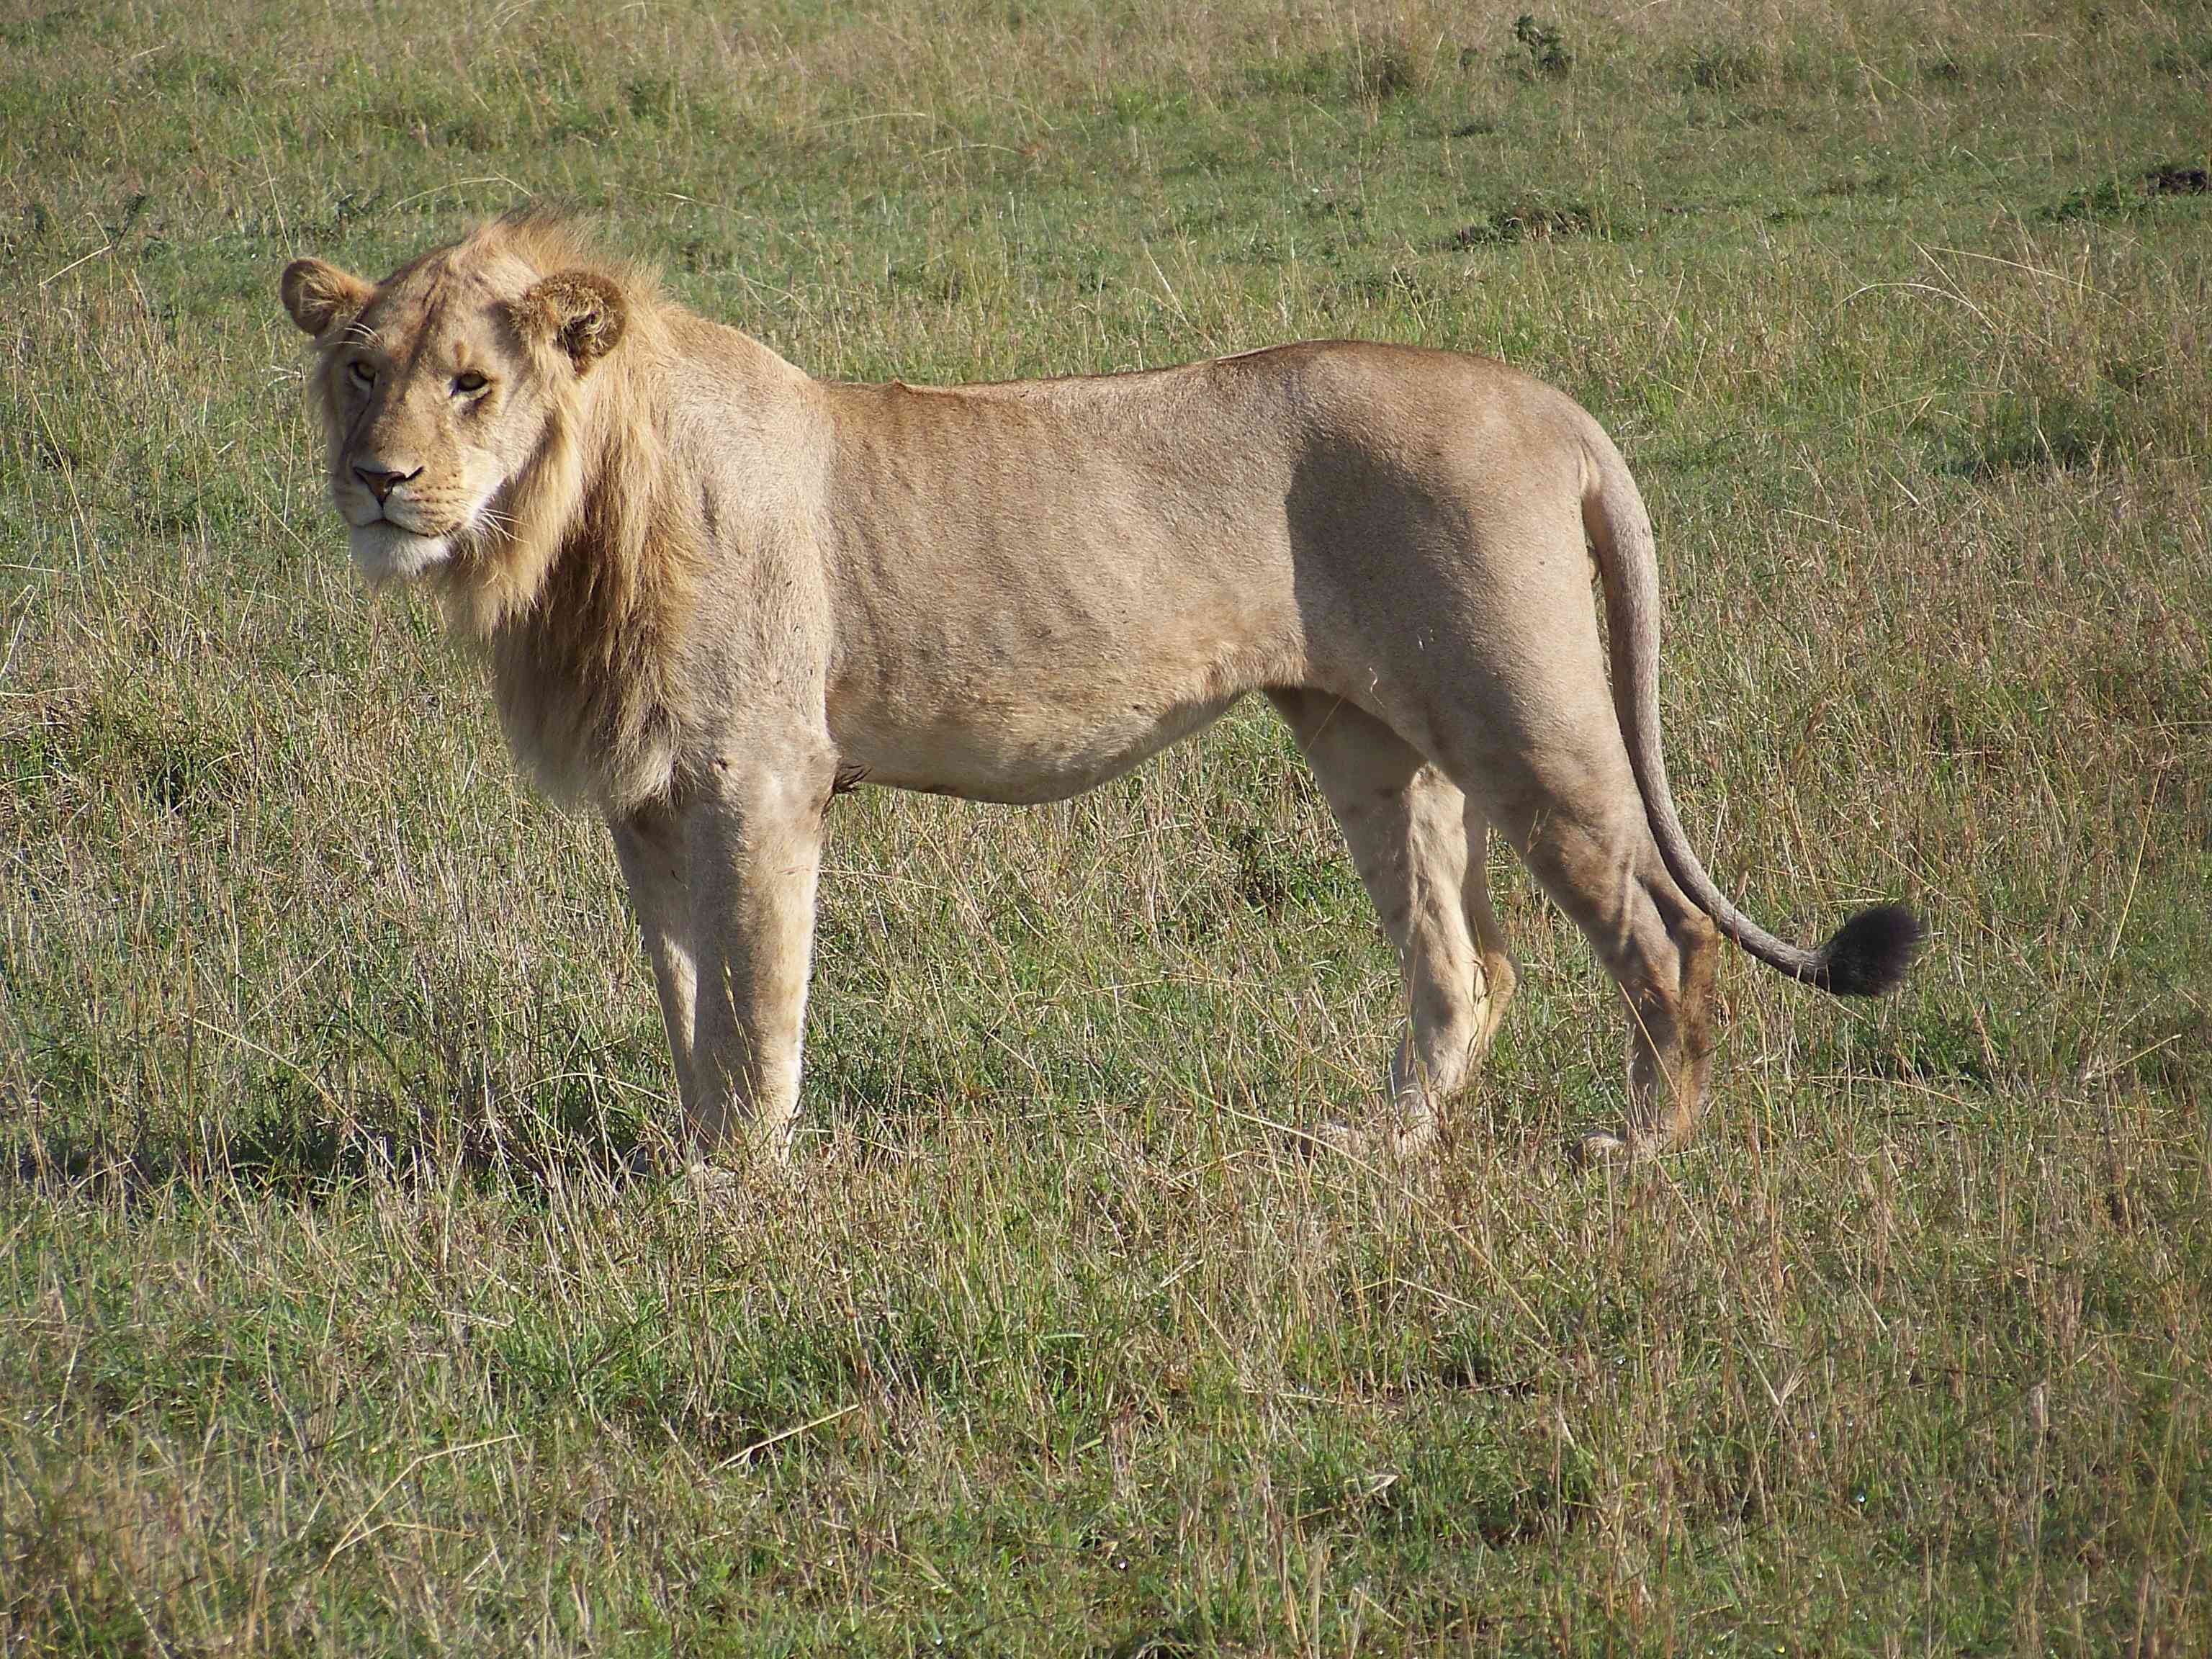 Male lion not in a pride, note ribs showing-3751